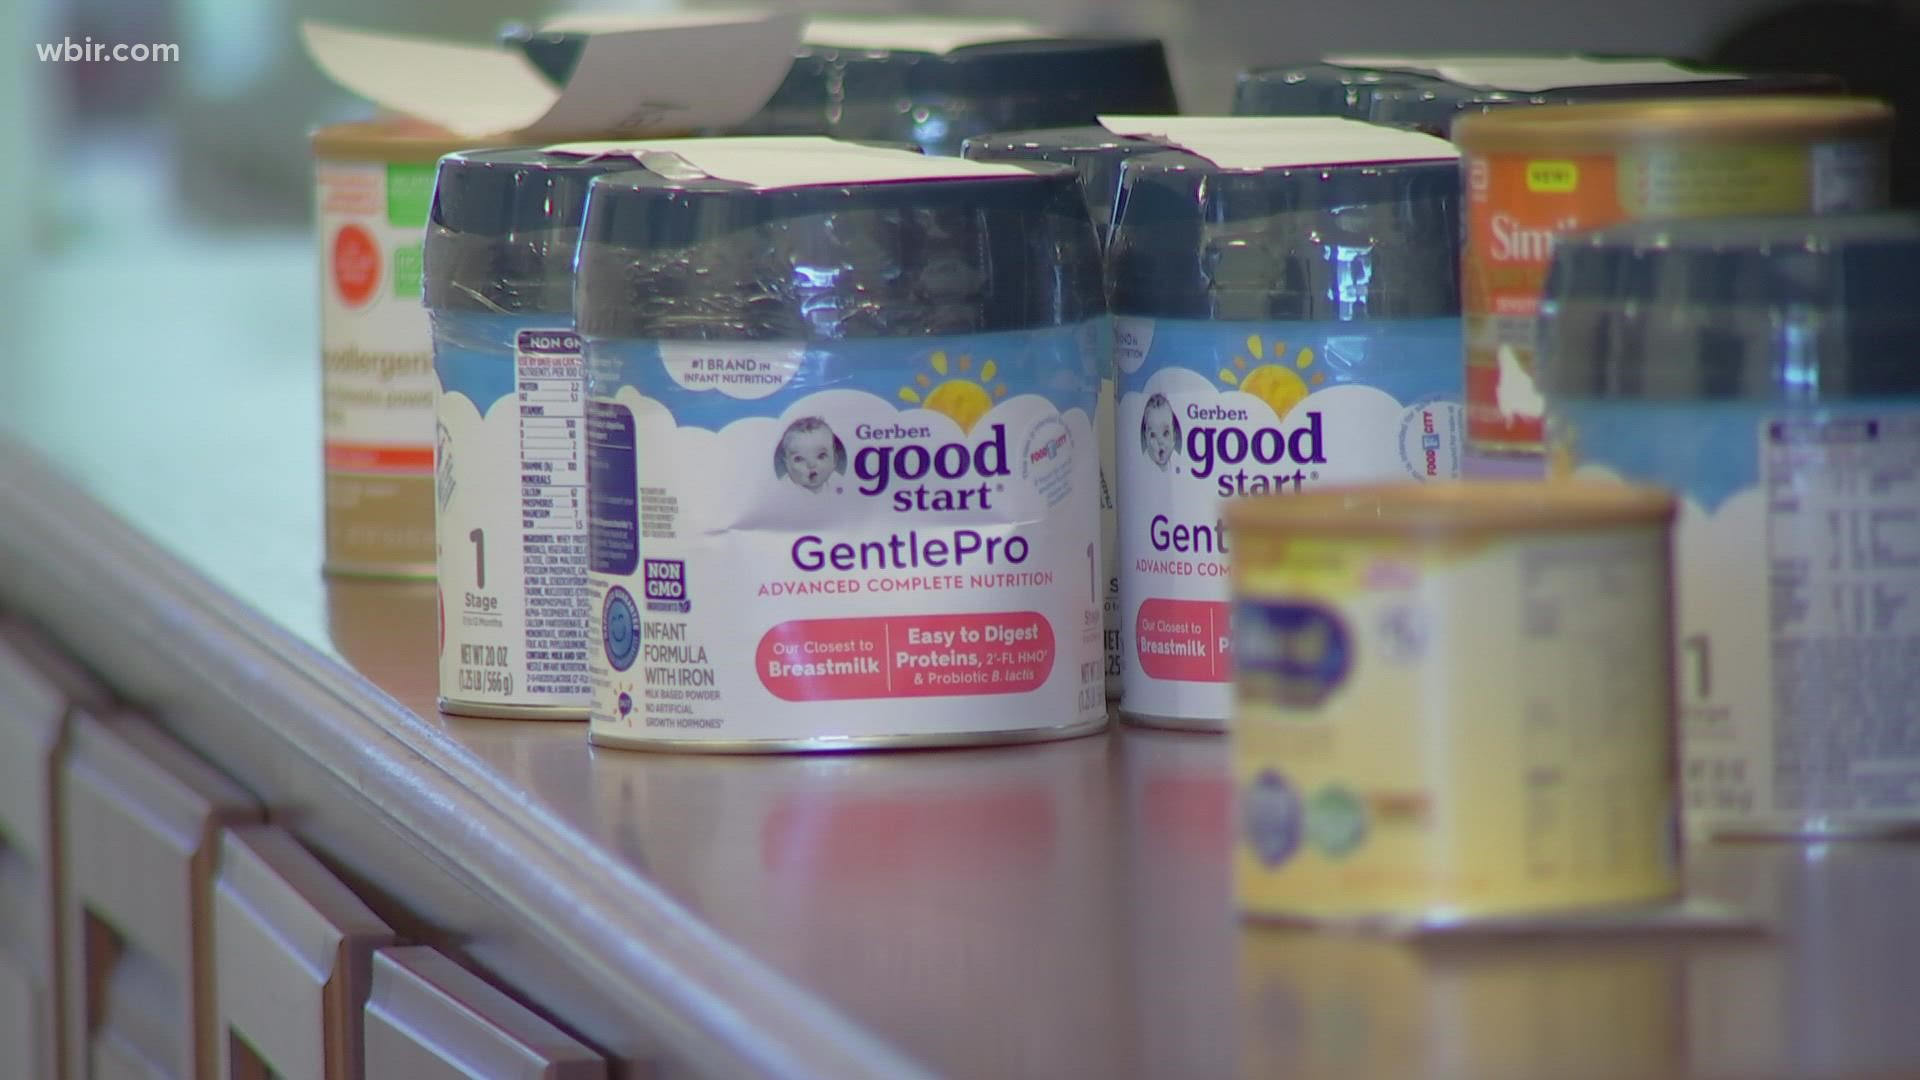 Hitchcock Family Medicine in Chattanooga is accepting unexpired and unopened baby formula donations from people across the region.